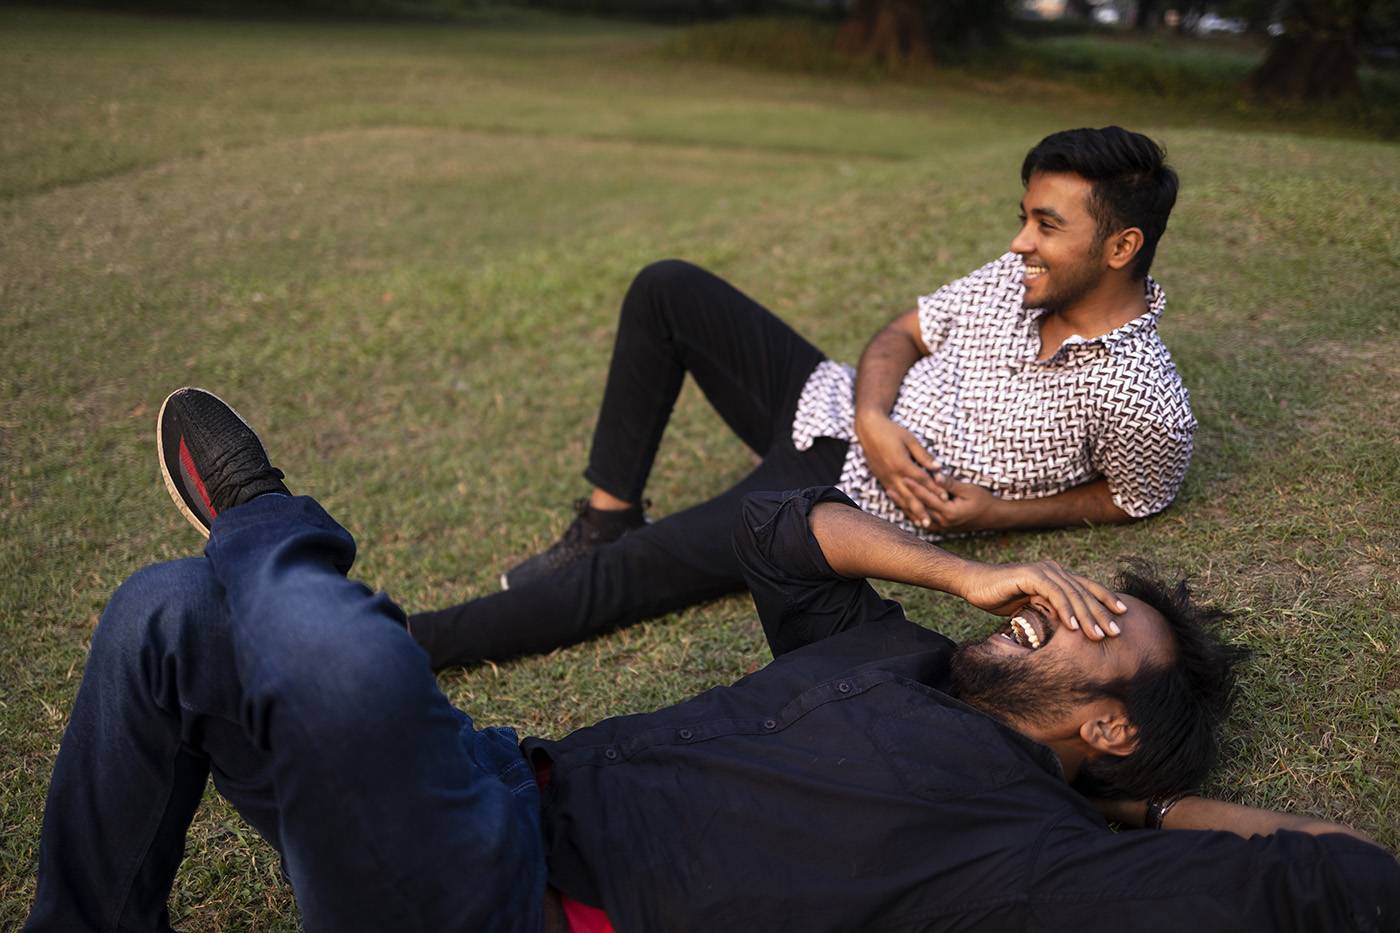 Two friends relaxing and interacting lying on grass ground at outdoors